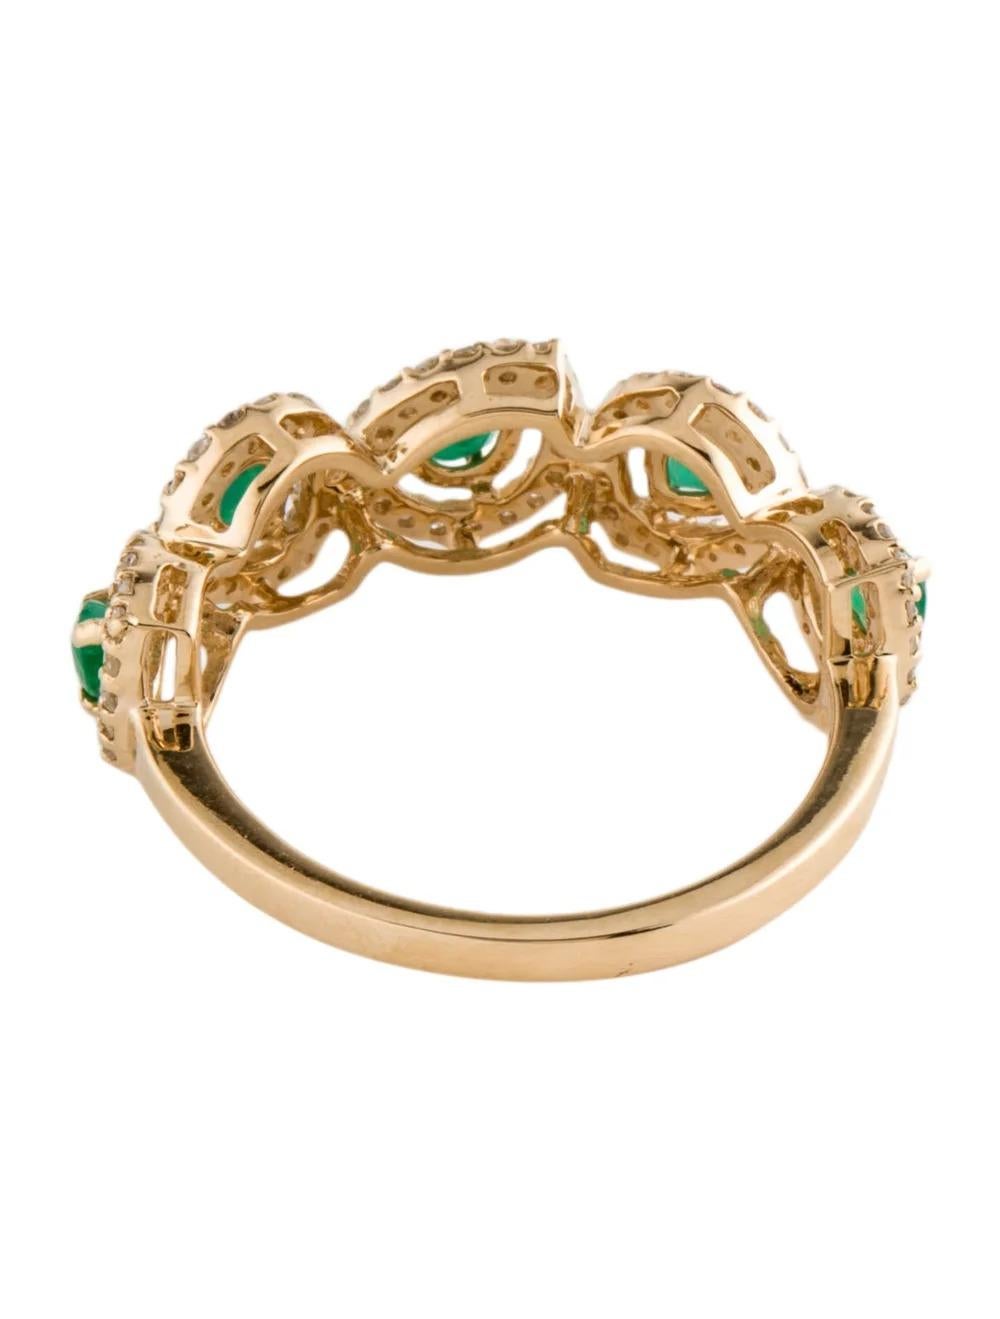 14K Emerald & Diamond Band Ring, Size 6.75: Elegant Green Gemstones, Luxury In New Condition For Sale In Holtsville, NY